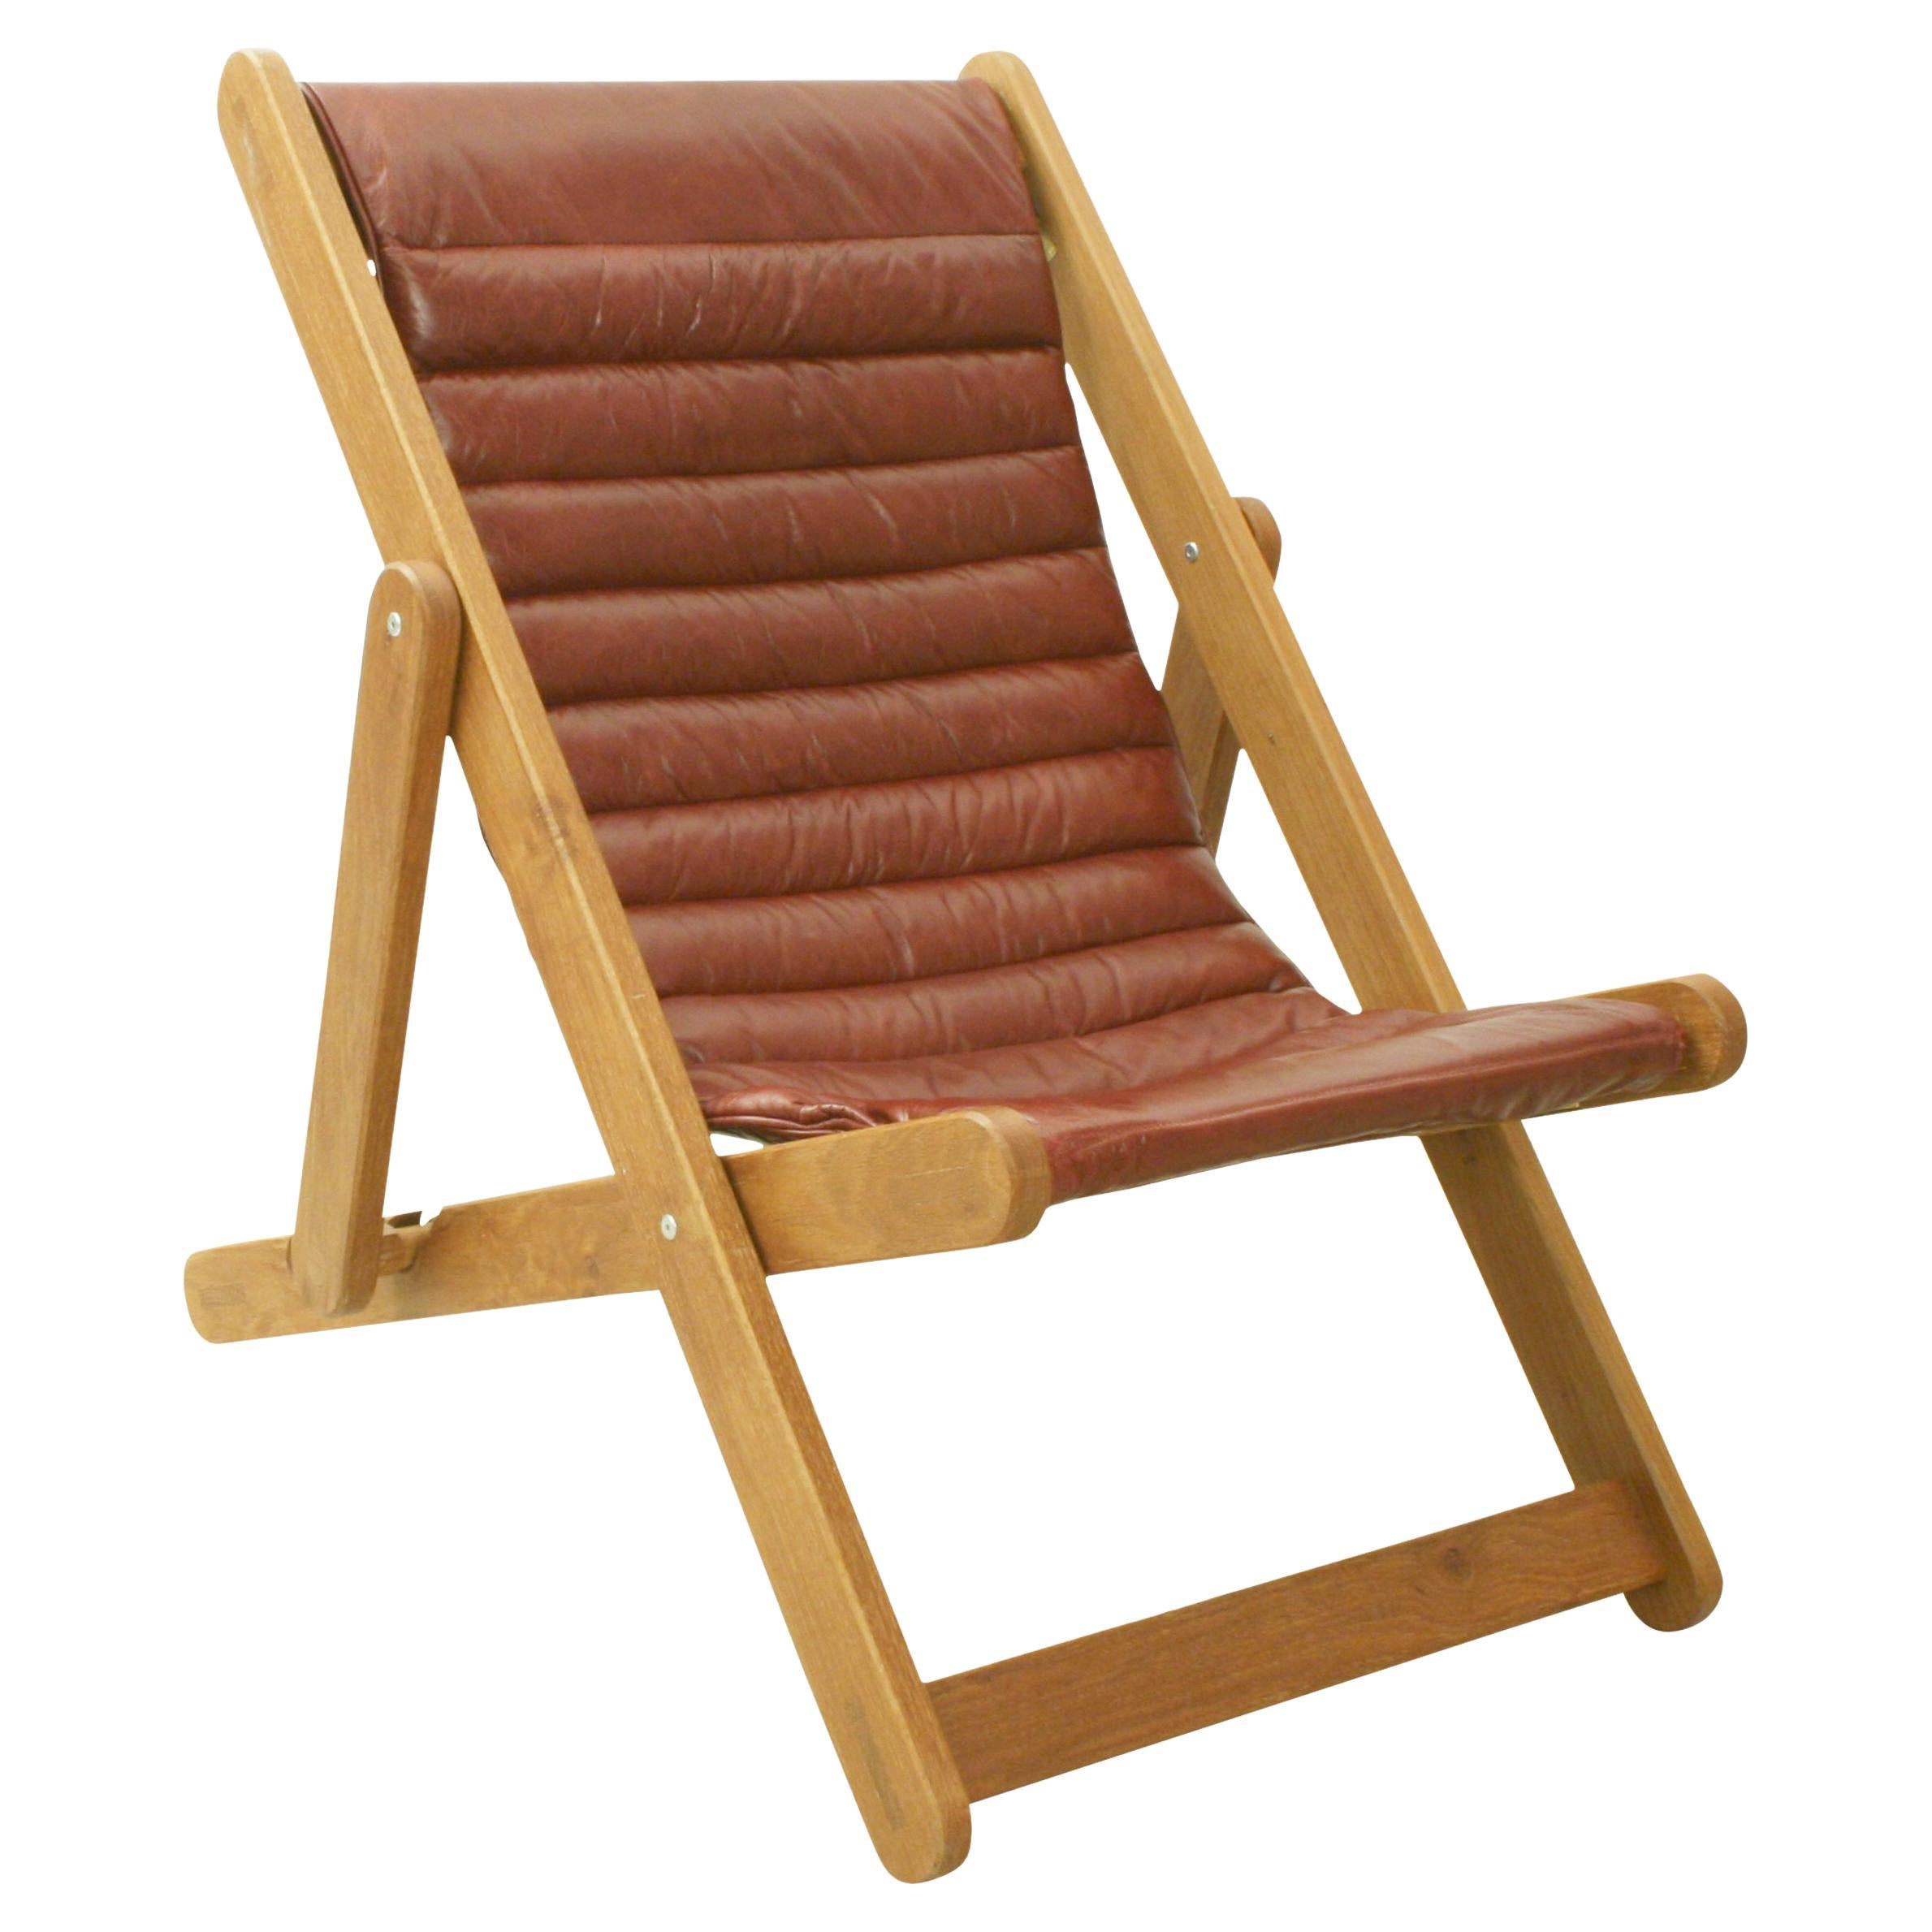 Leather and Oak Deck Chair, Library Chair. For Sale